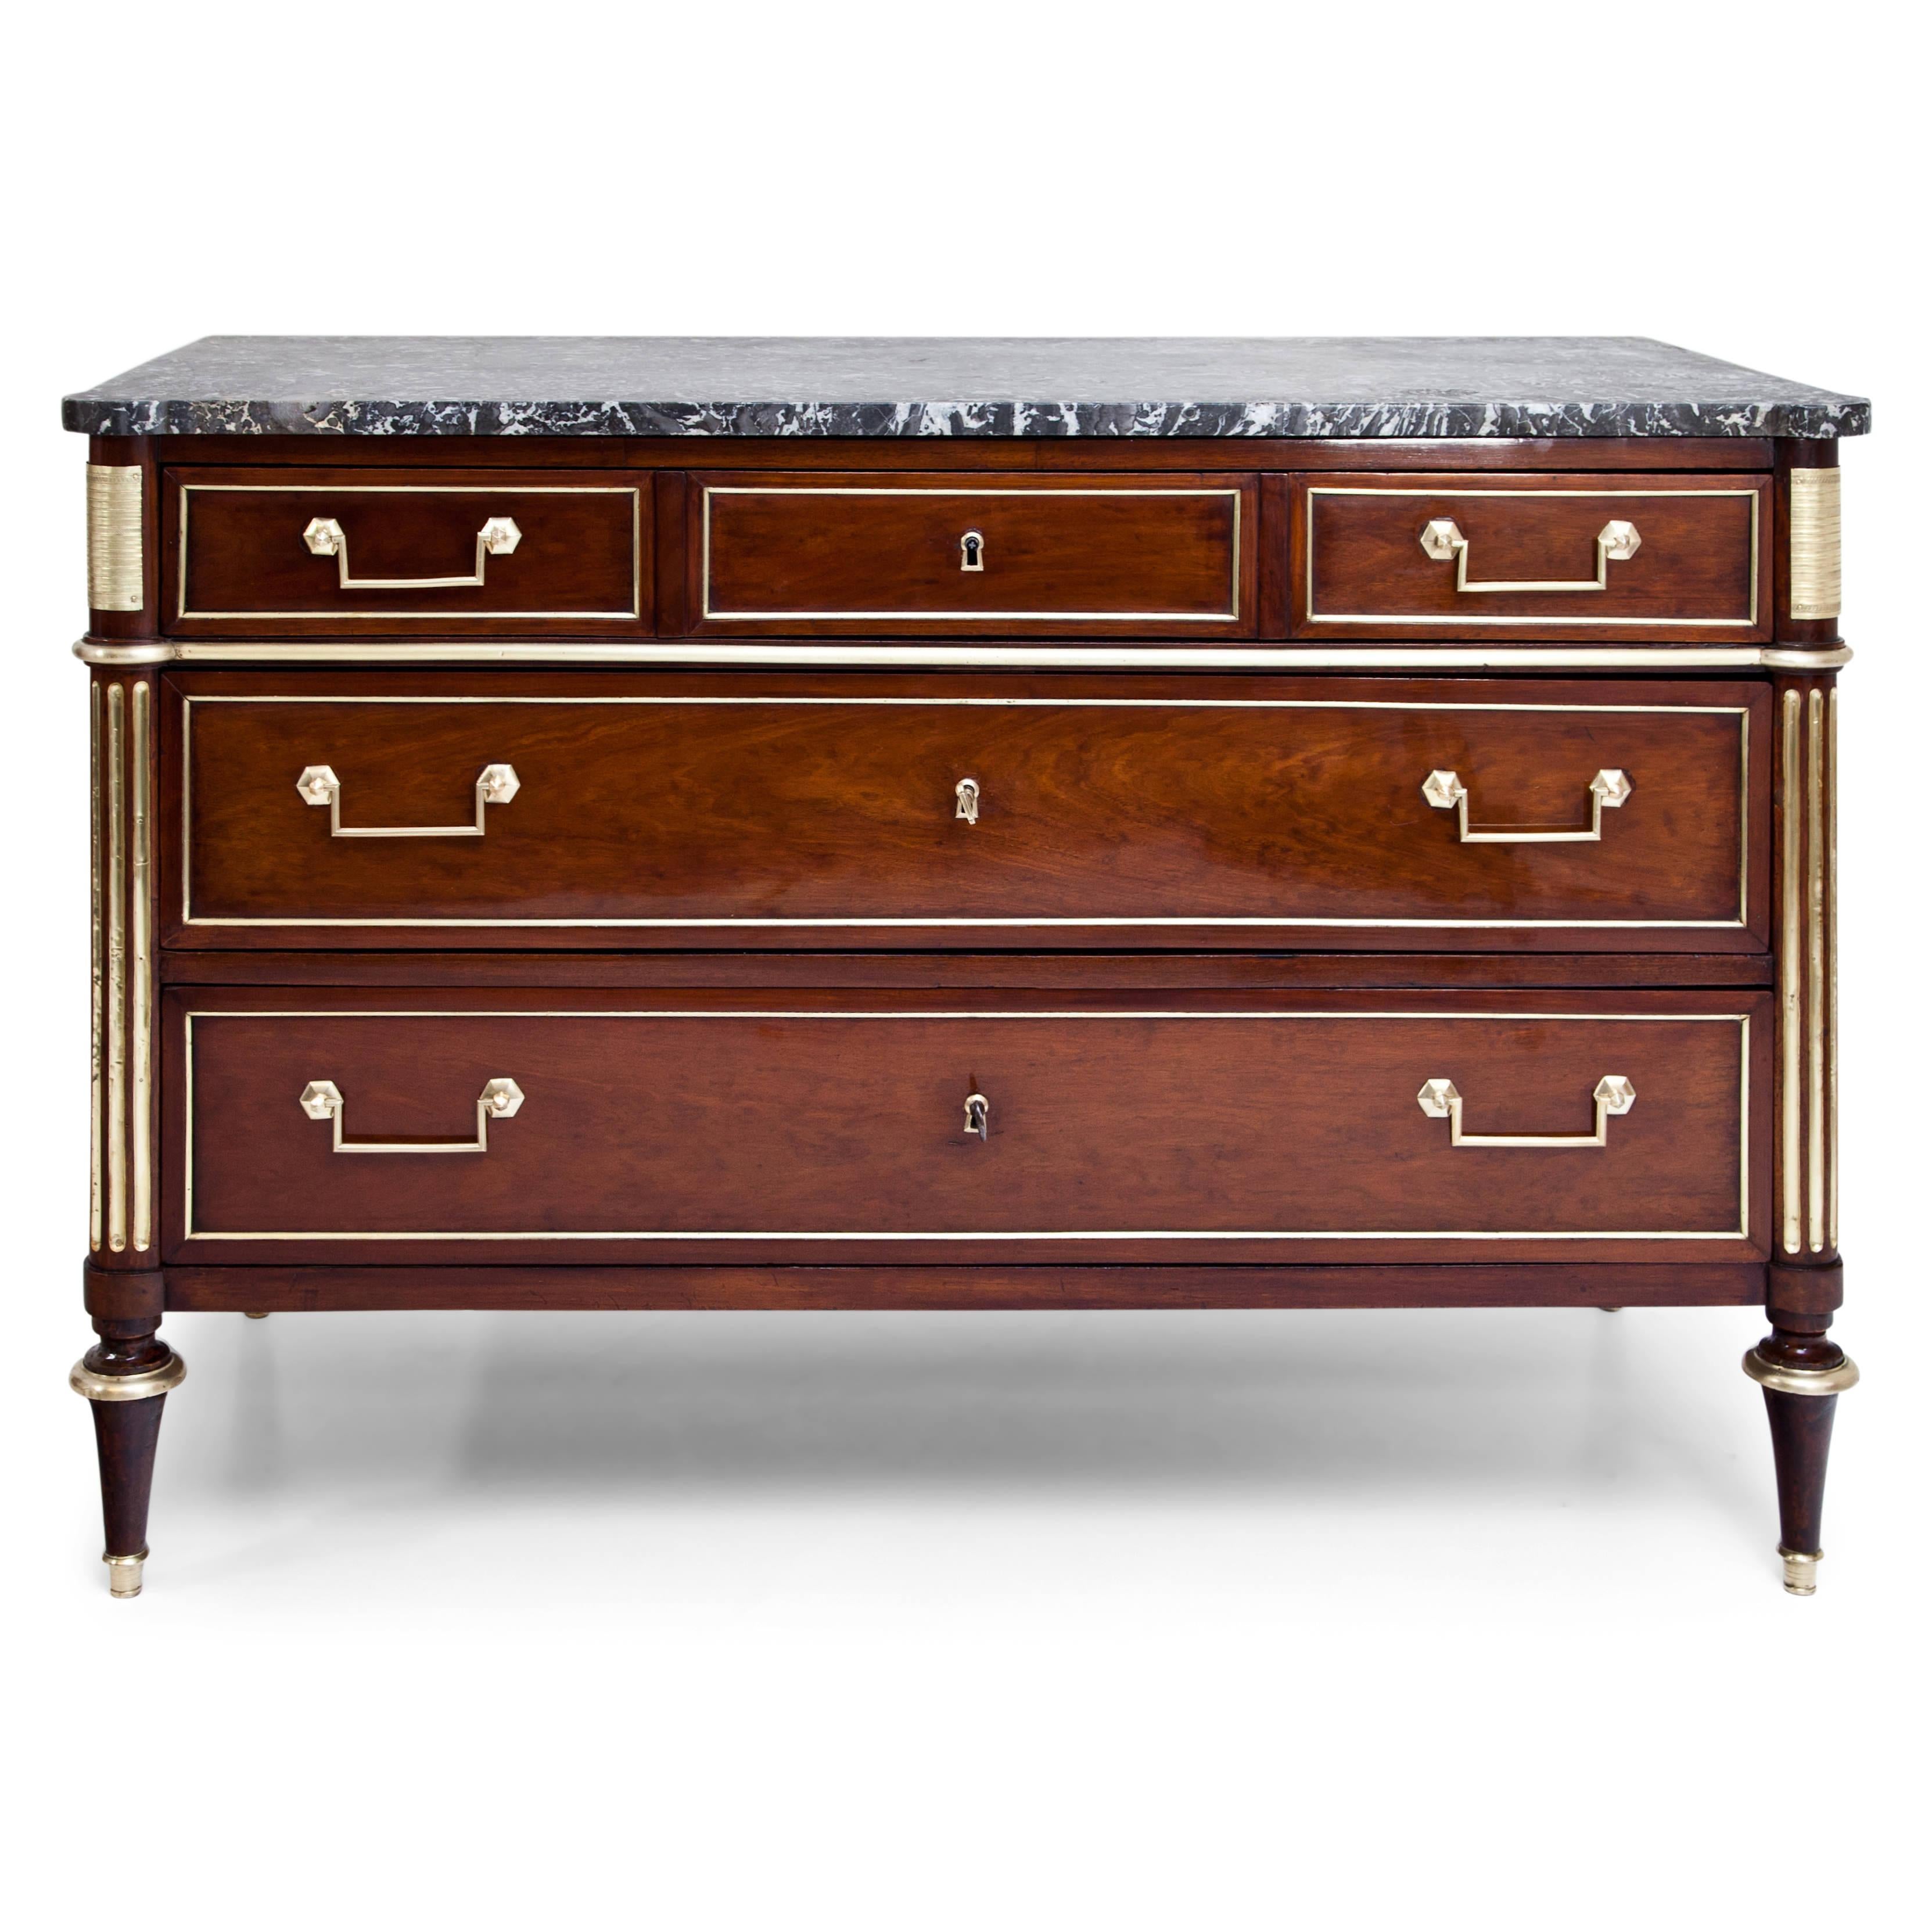 Three-drawered Directoire mahogany chest of drawers with grey-white marble top on conical legs with brass sabots, the corners in fluted three-quarter columns with brass fittings. The drawers with brass profiles, the top one visually divided into